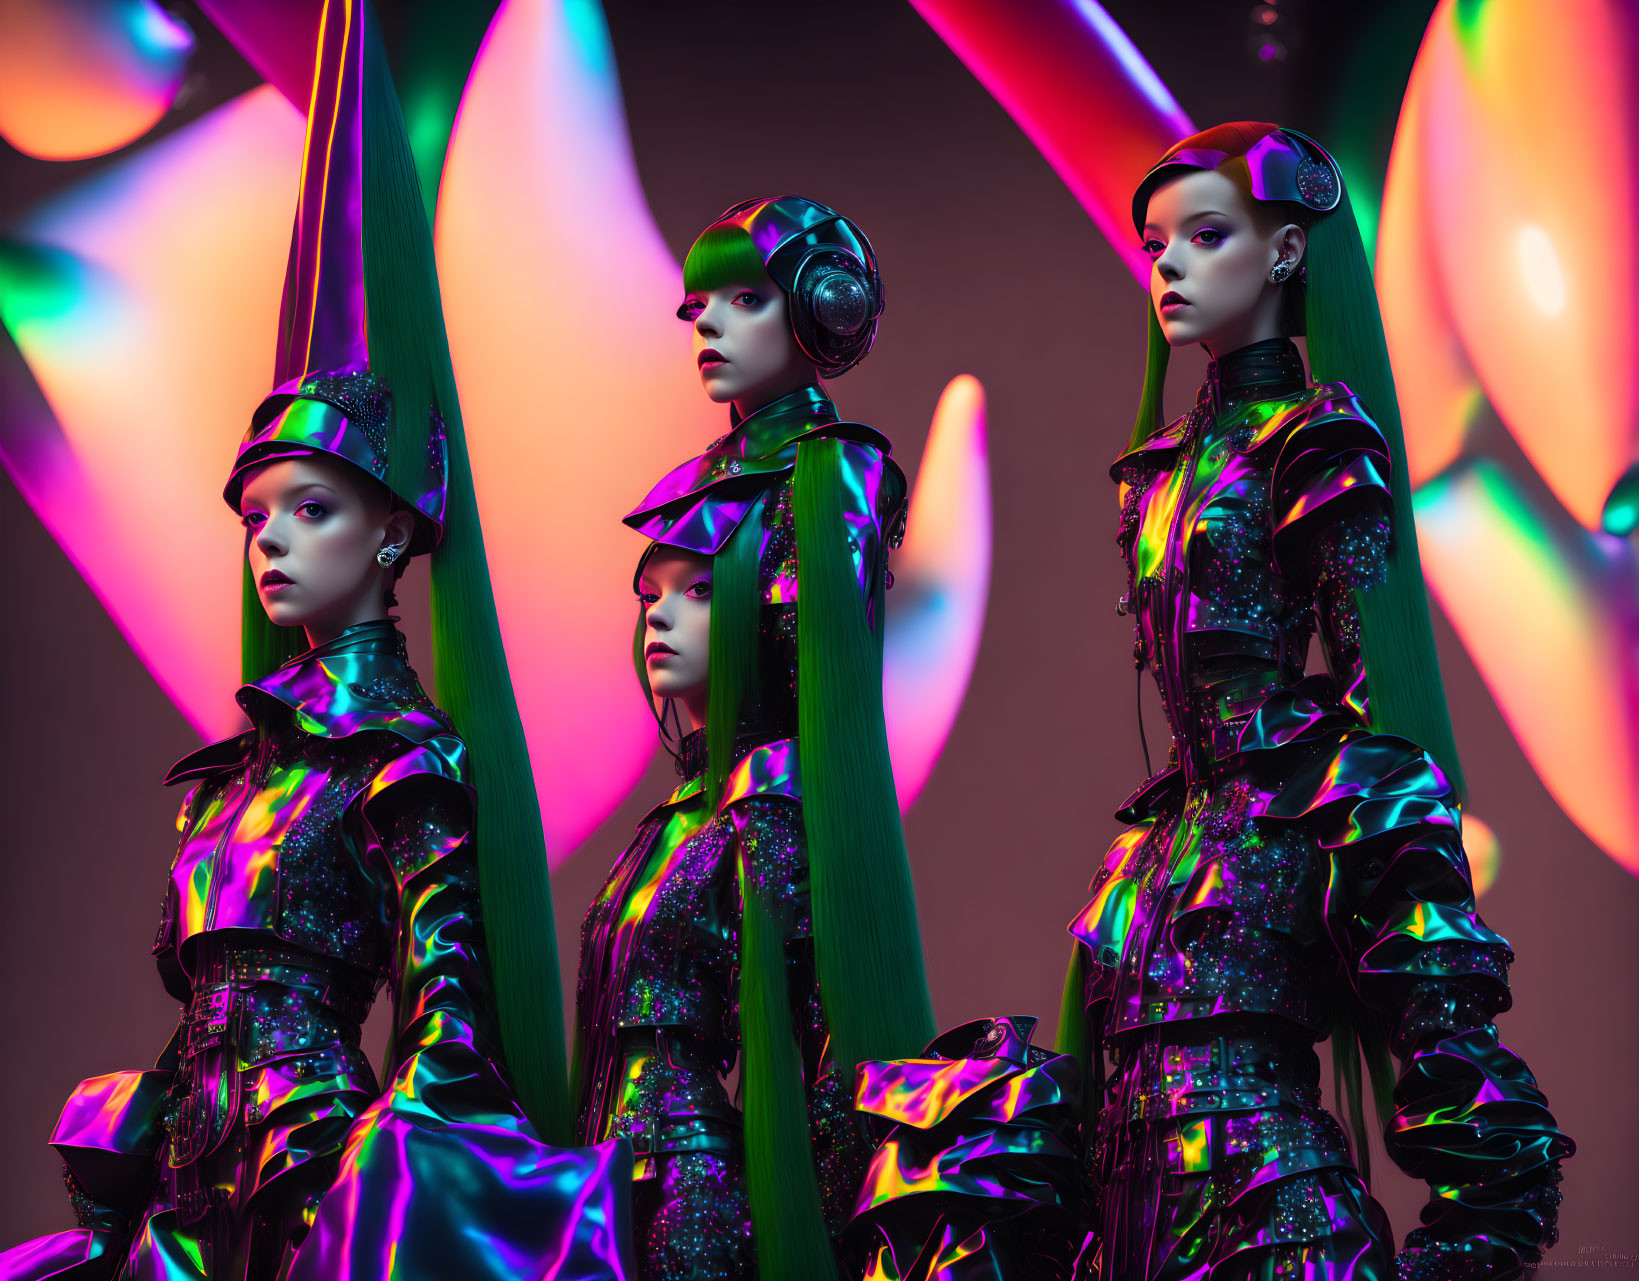 Mannequins in futuristic outfits under colorful light projections